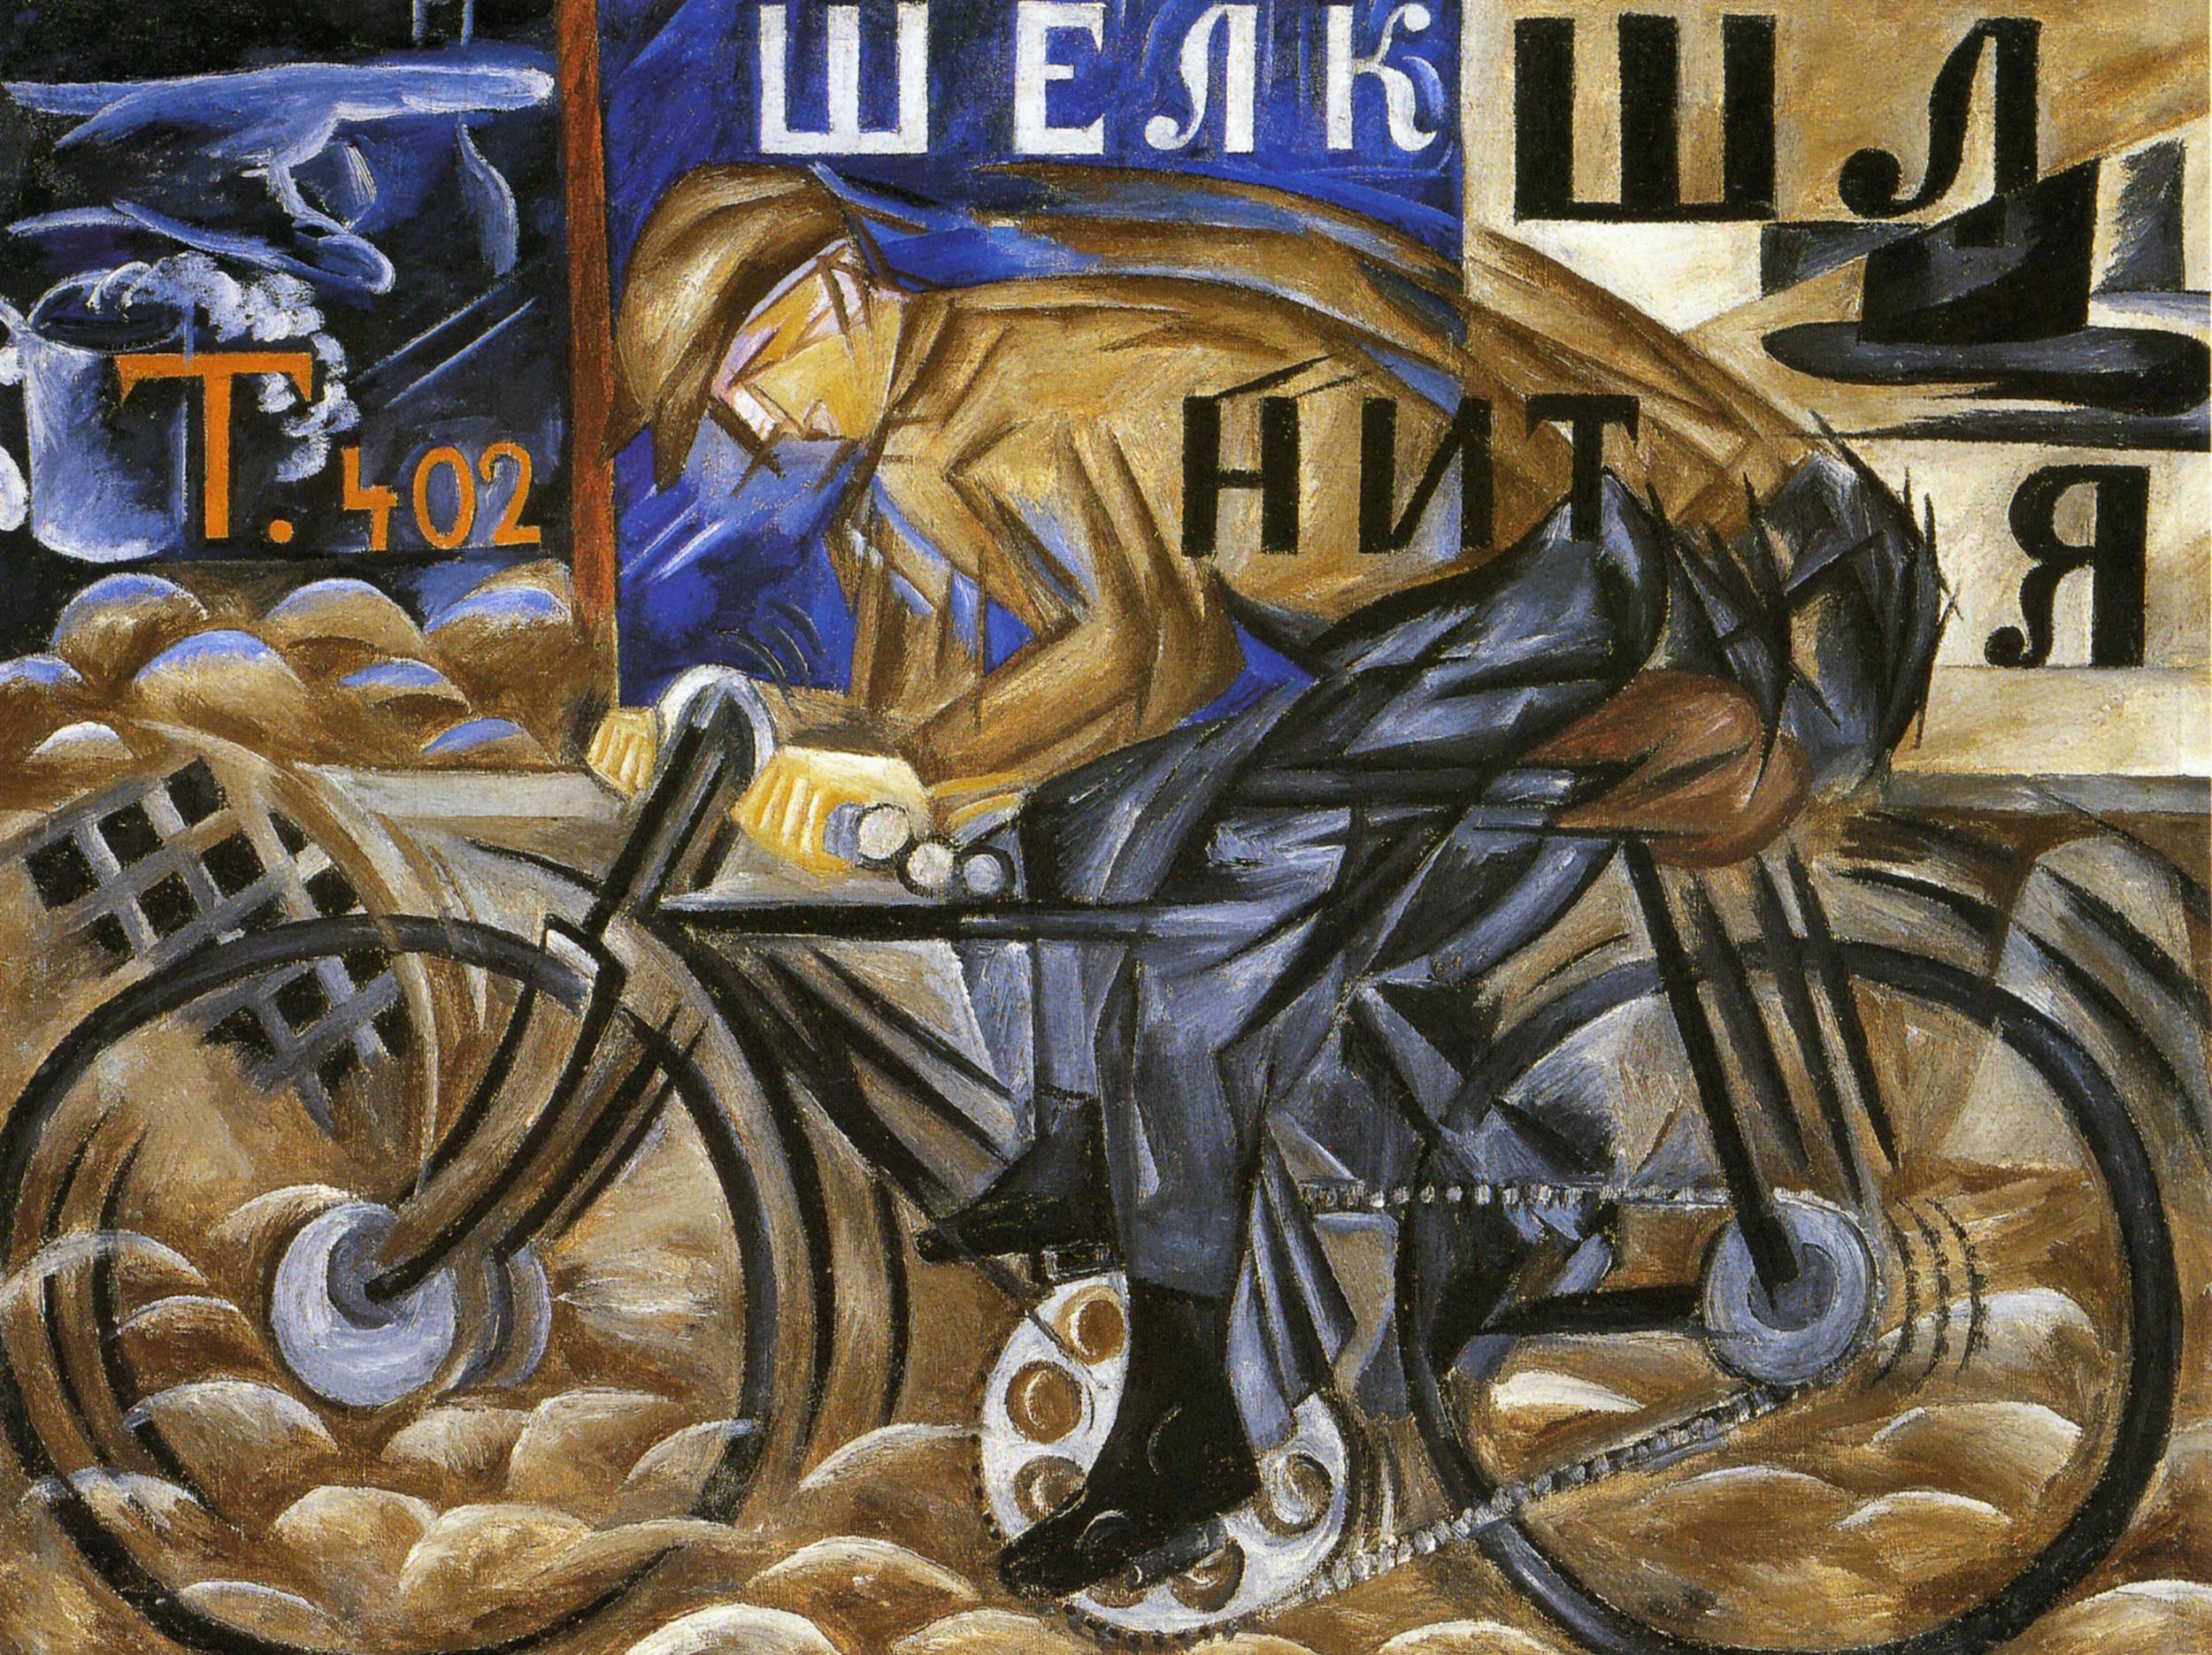 The Cyclist by Natalia Goncharova - 1913 - 78 x 105 cm private collection